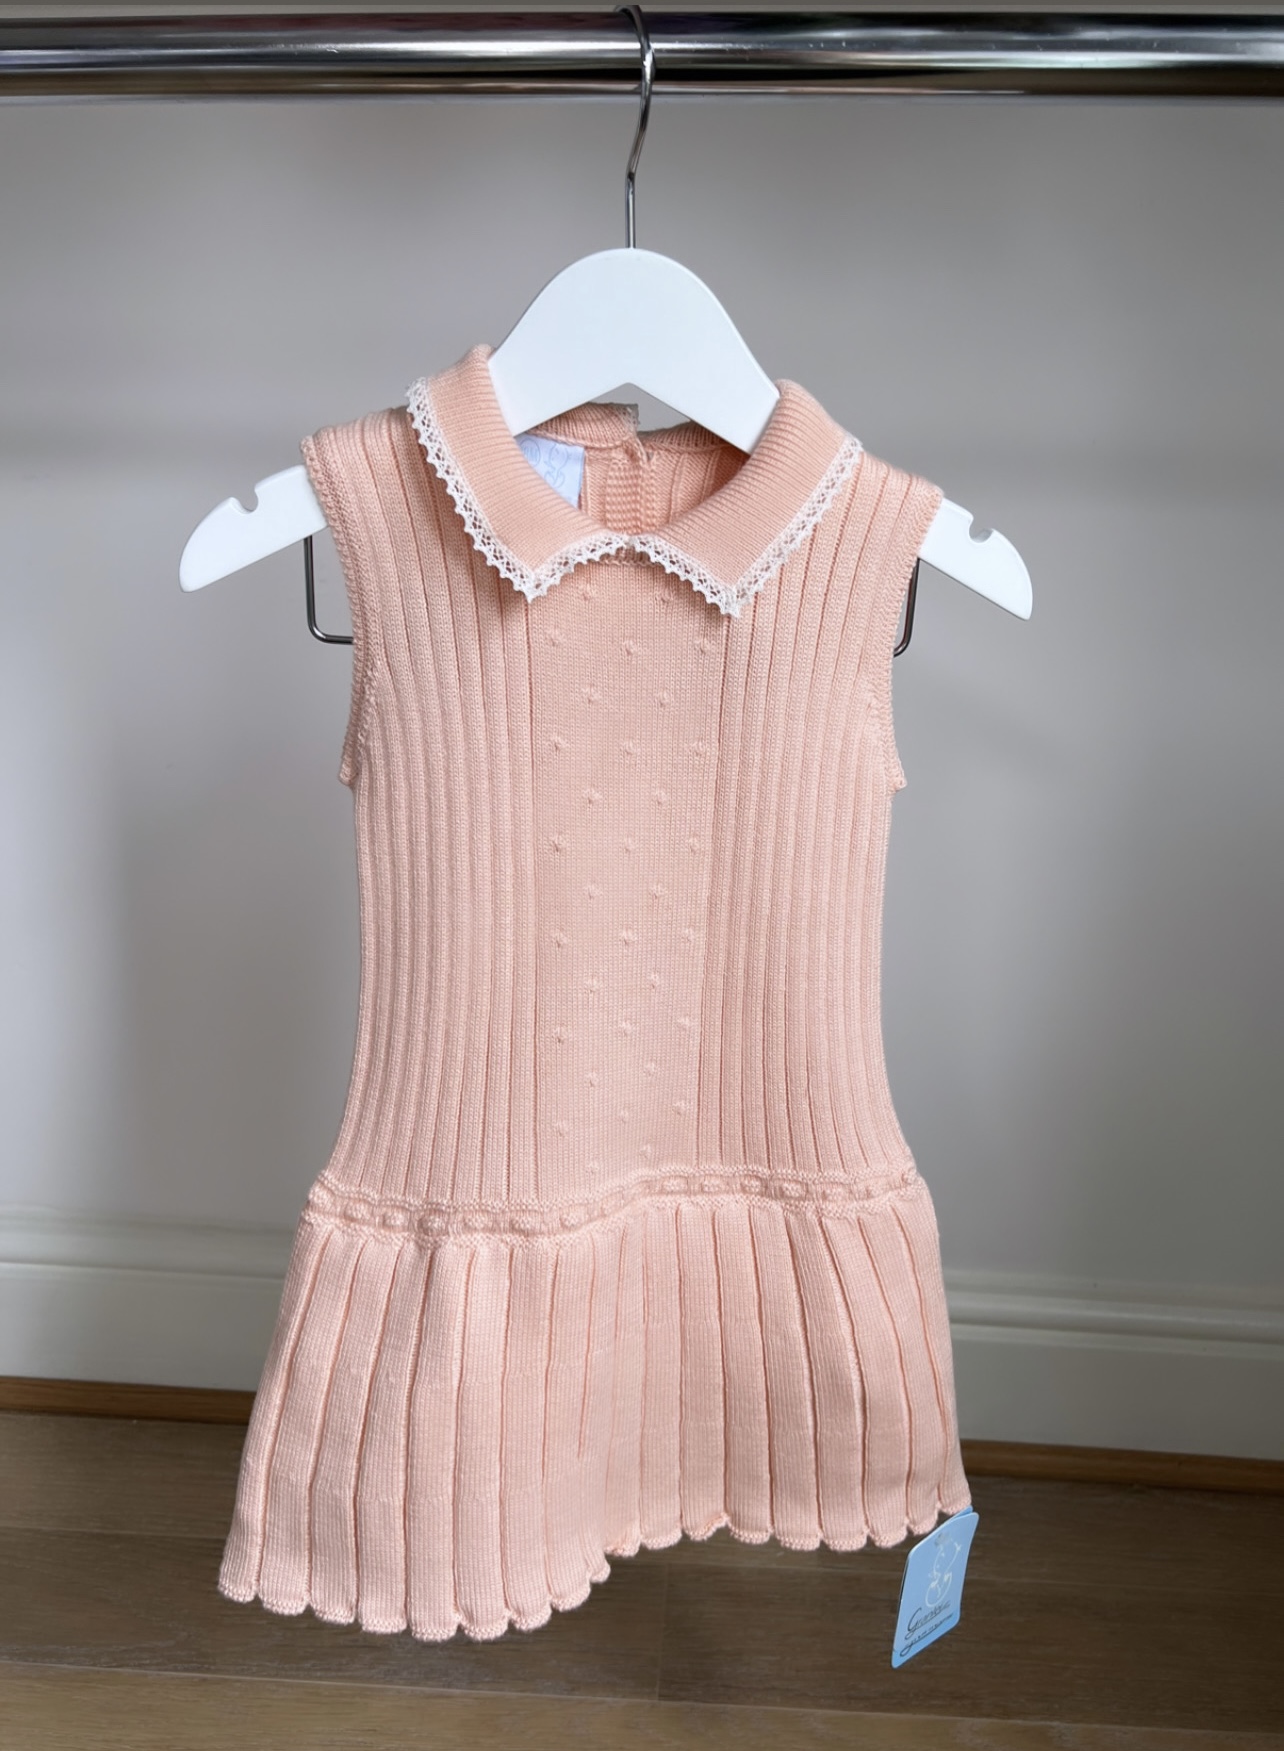 Granlei Peach Collared Dress with Lace Trim